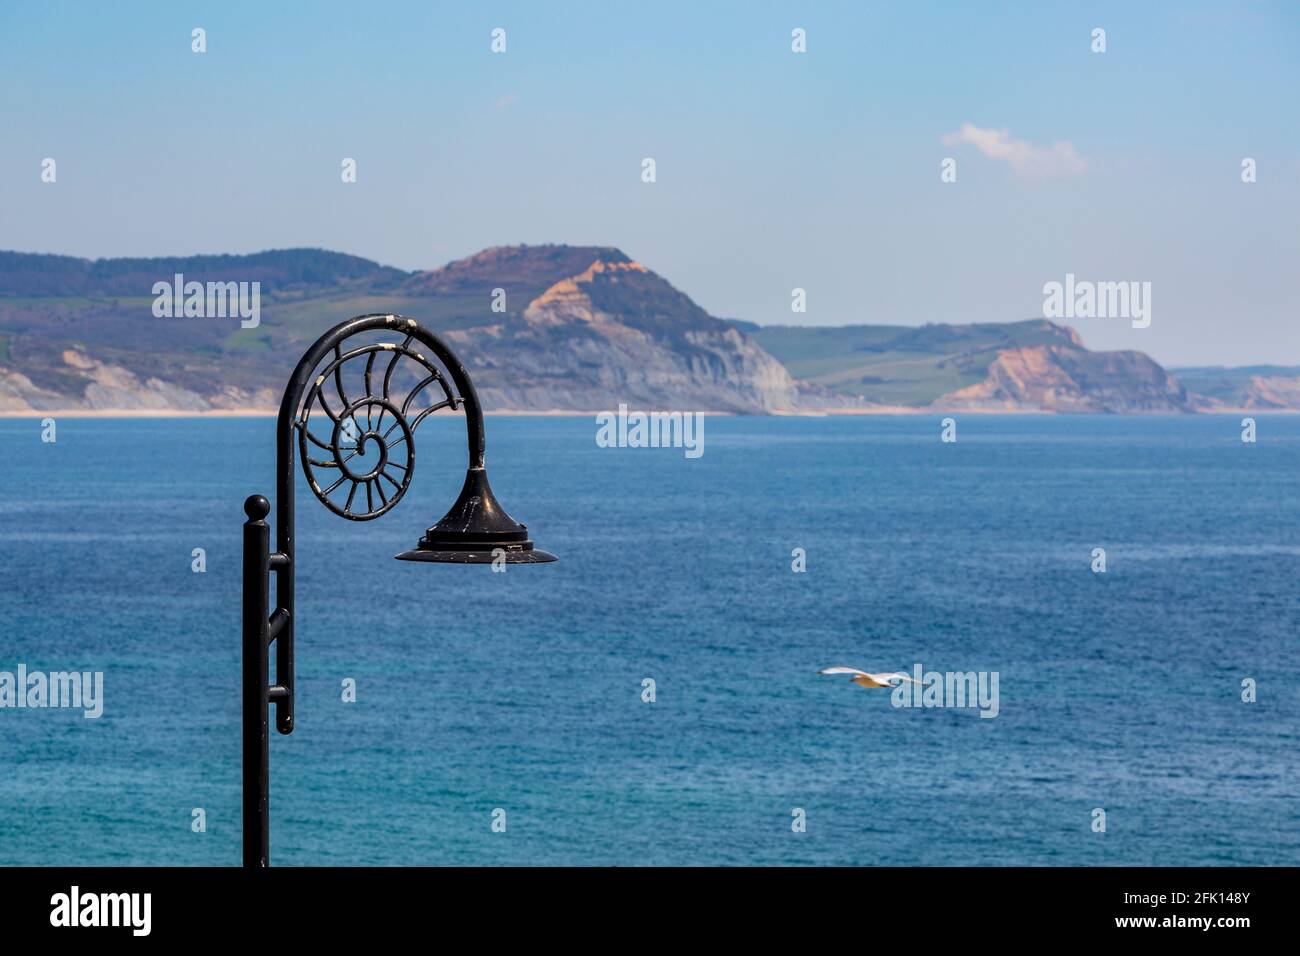 A Lyme Regis Ammonite lampost with the Jurassic Coast in the background, Dorset, England Stock Photo